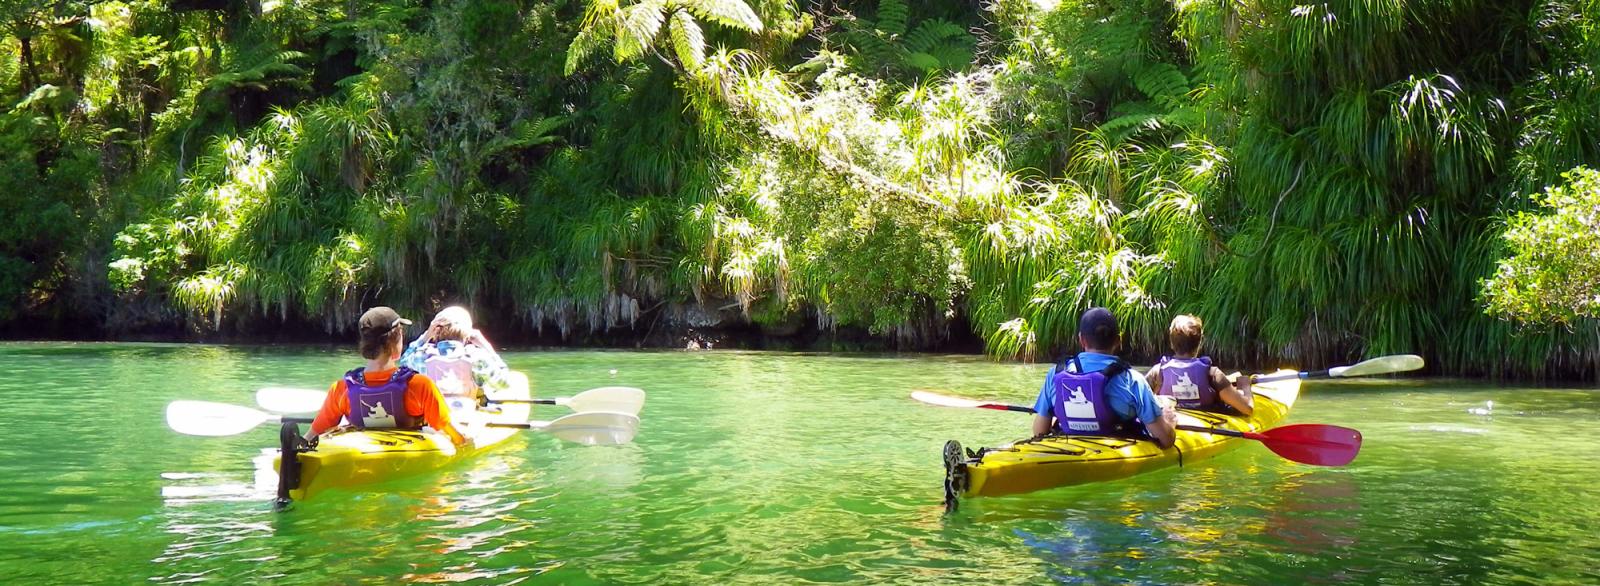 Two couples kayak around the tranquil waters of the Marlborough Sounds.